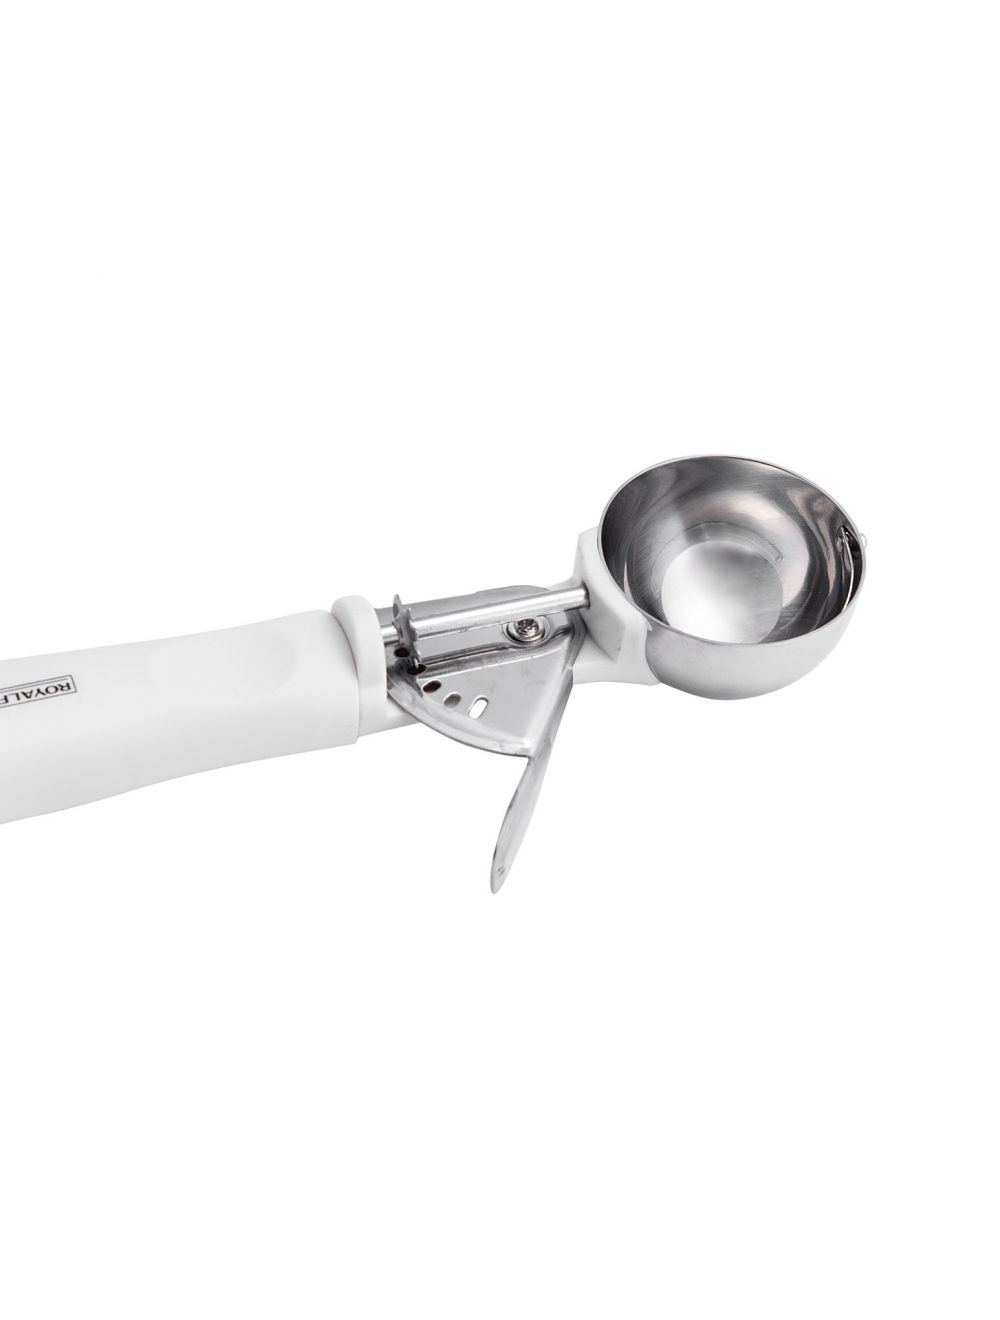 Royalford Stainless Steel Ice Cream Scoop | Kitchen Appliances | Halabh.com|